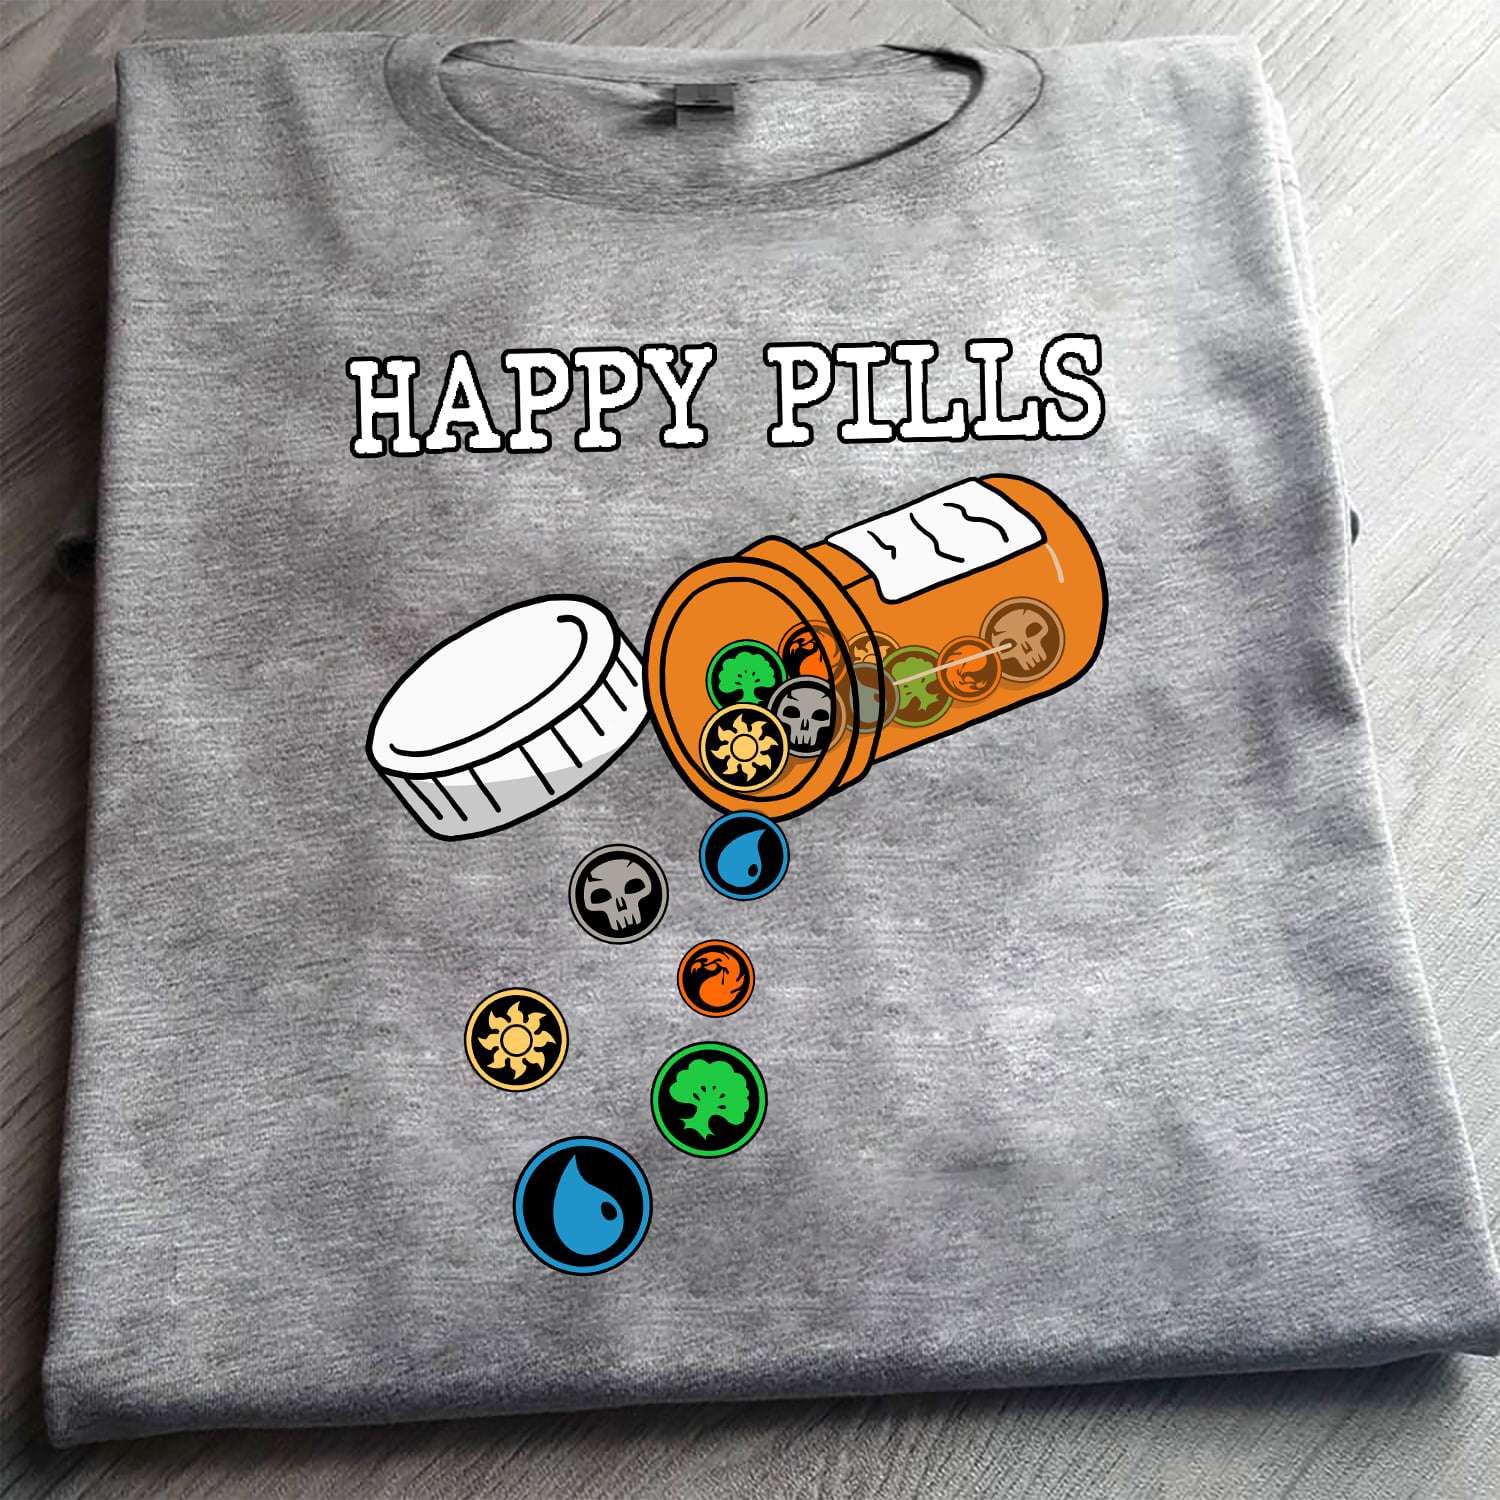 Happy pills - World elements, pill for the happiness